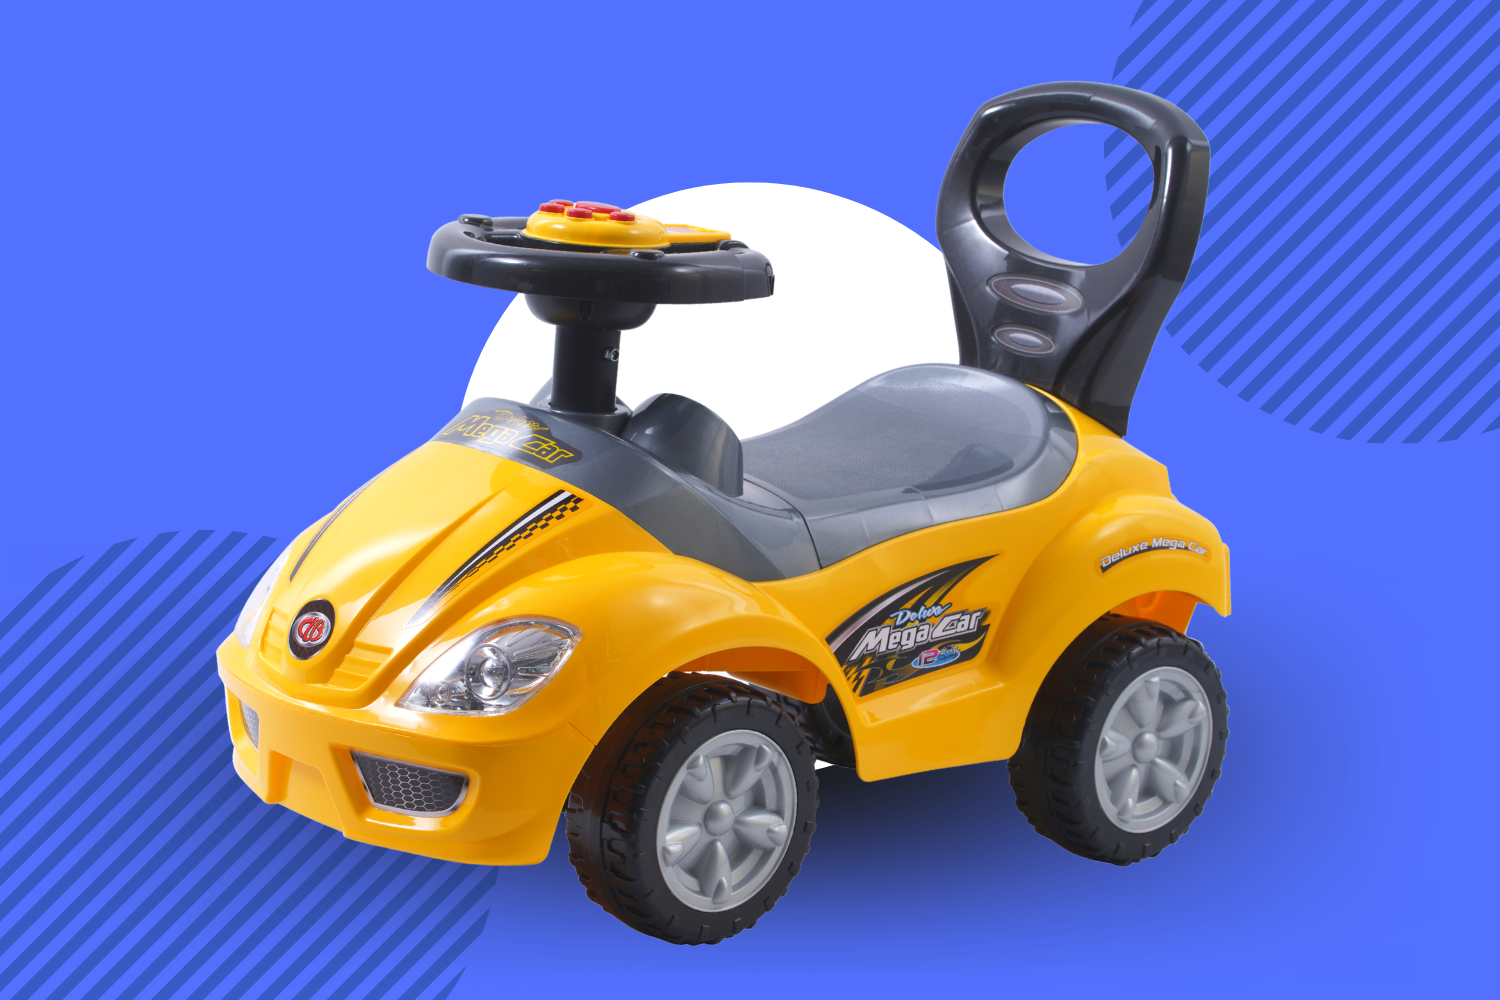 How our Freddo Deluxe Ride-on Toy will upgrade your family time